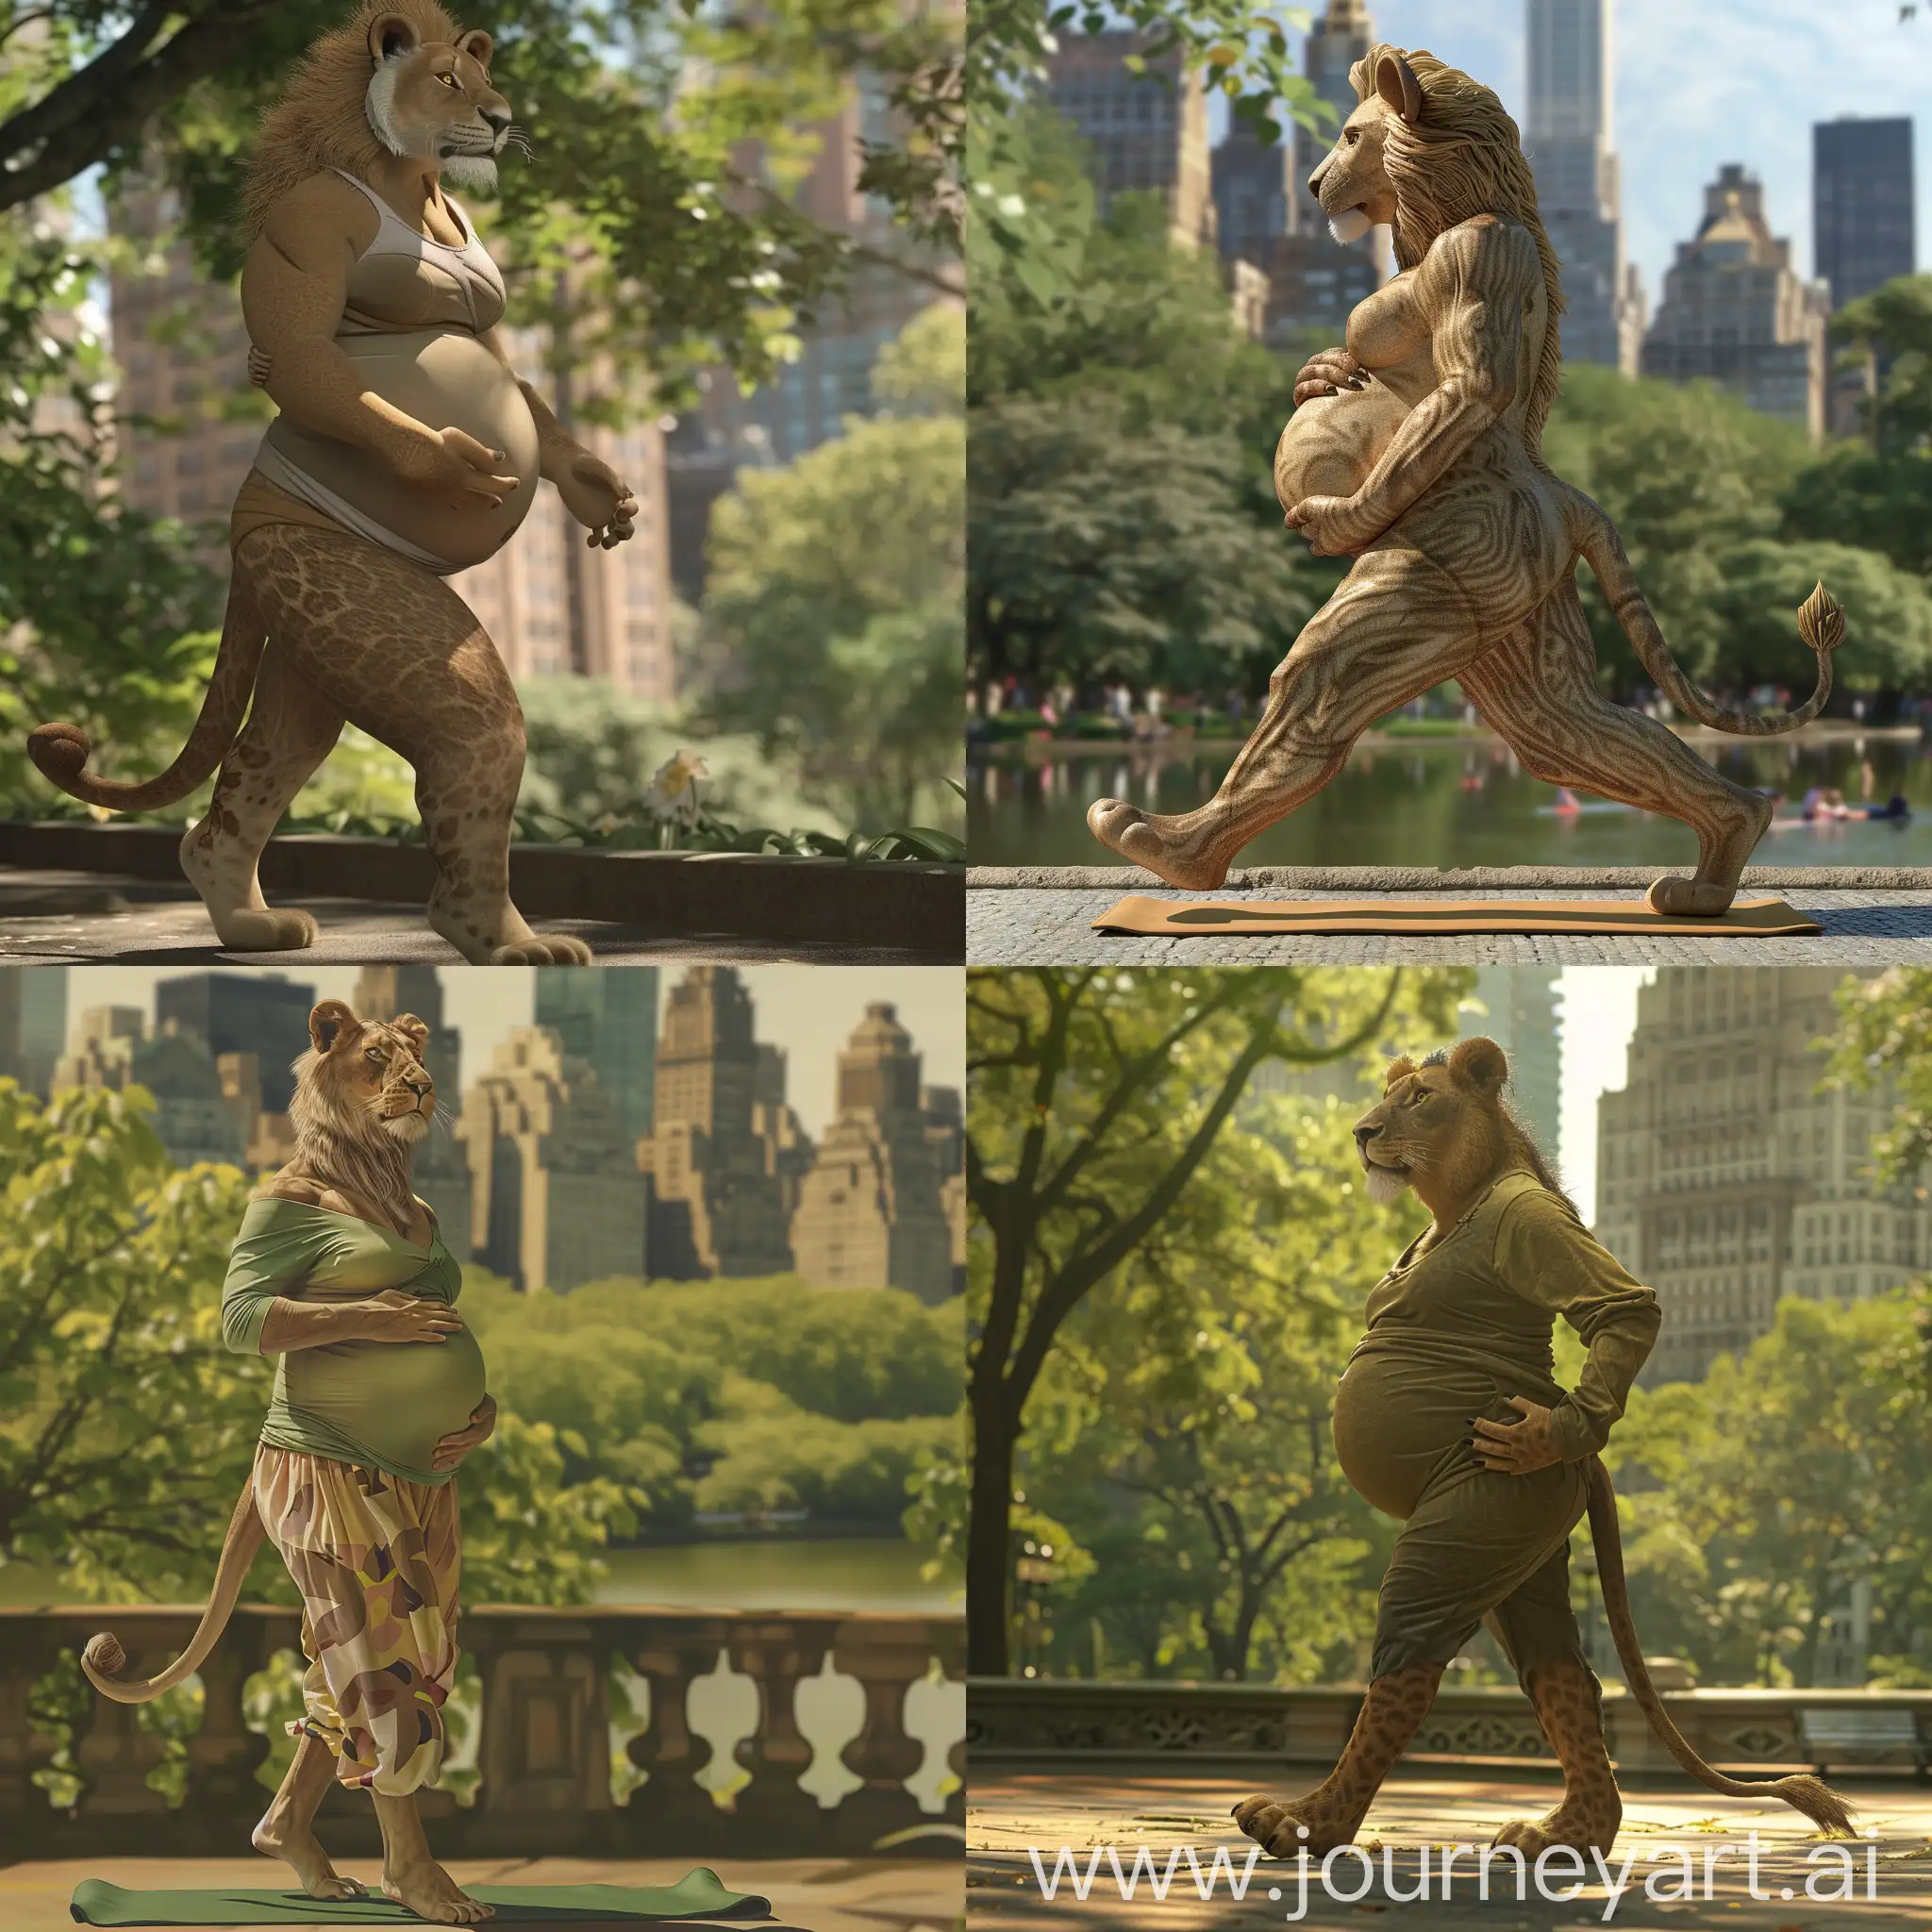 an anthropomorphic pregnant lioness woman walking through central park, wearing yoga attire.